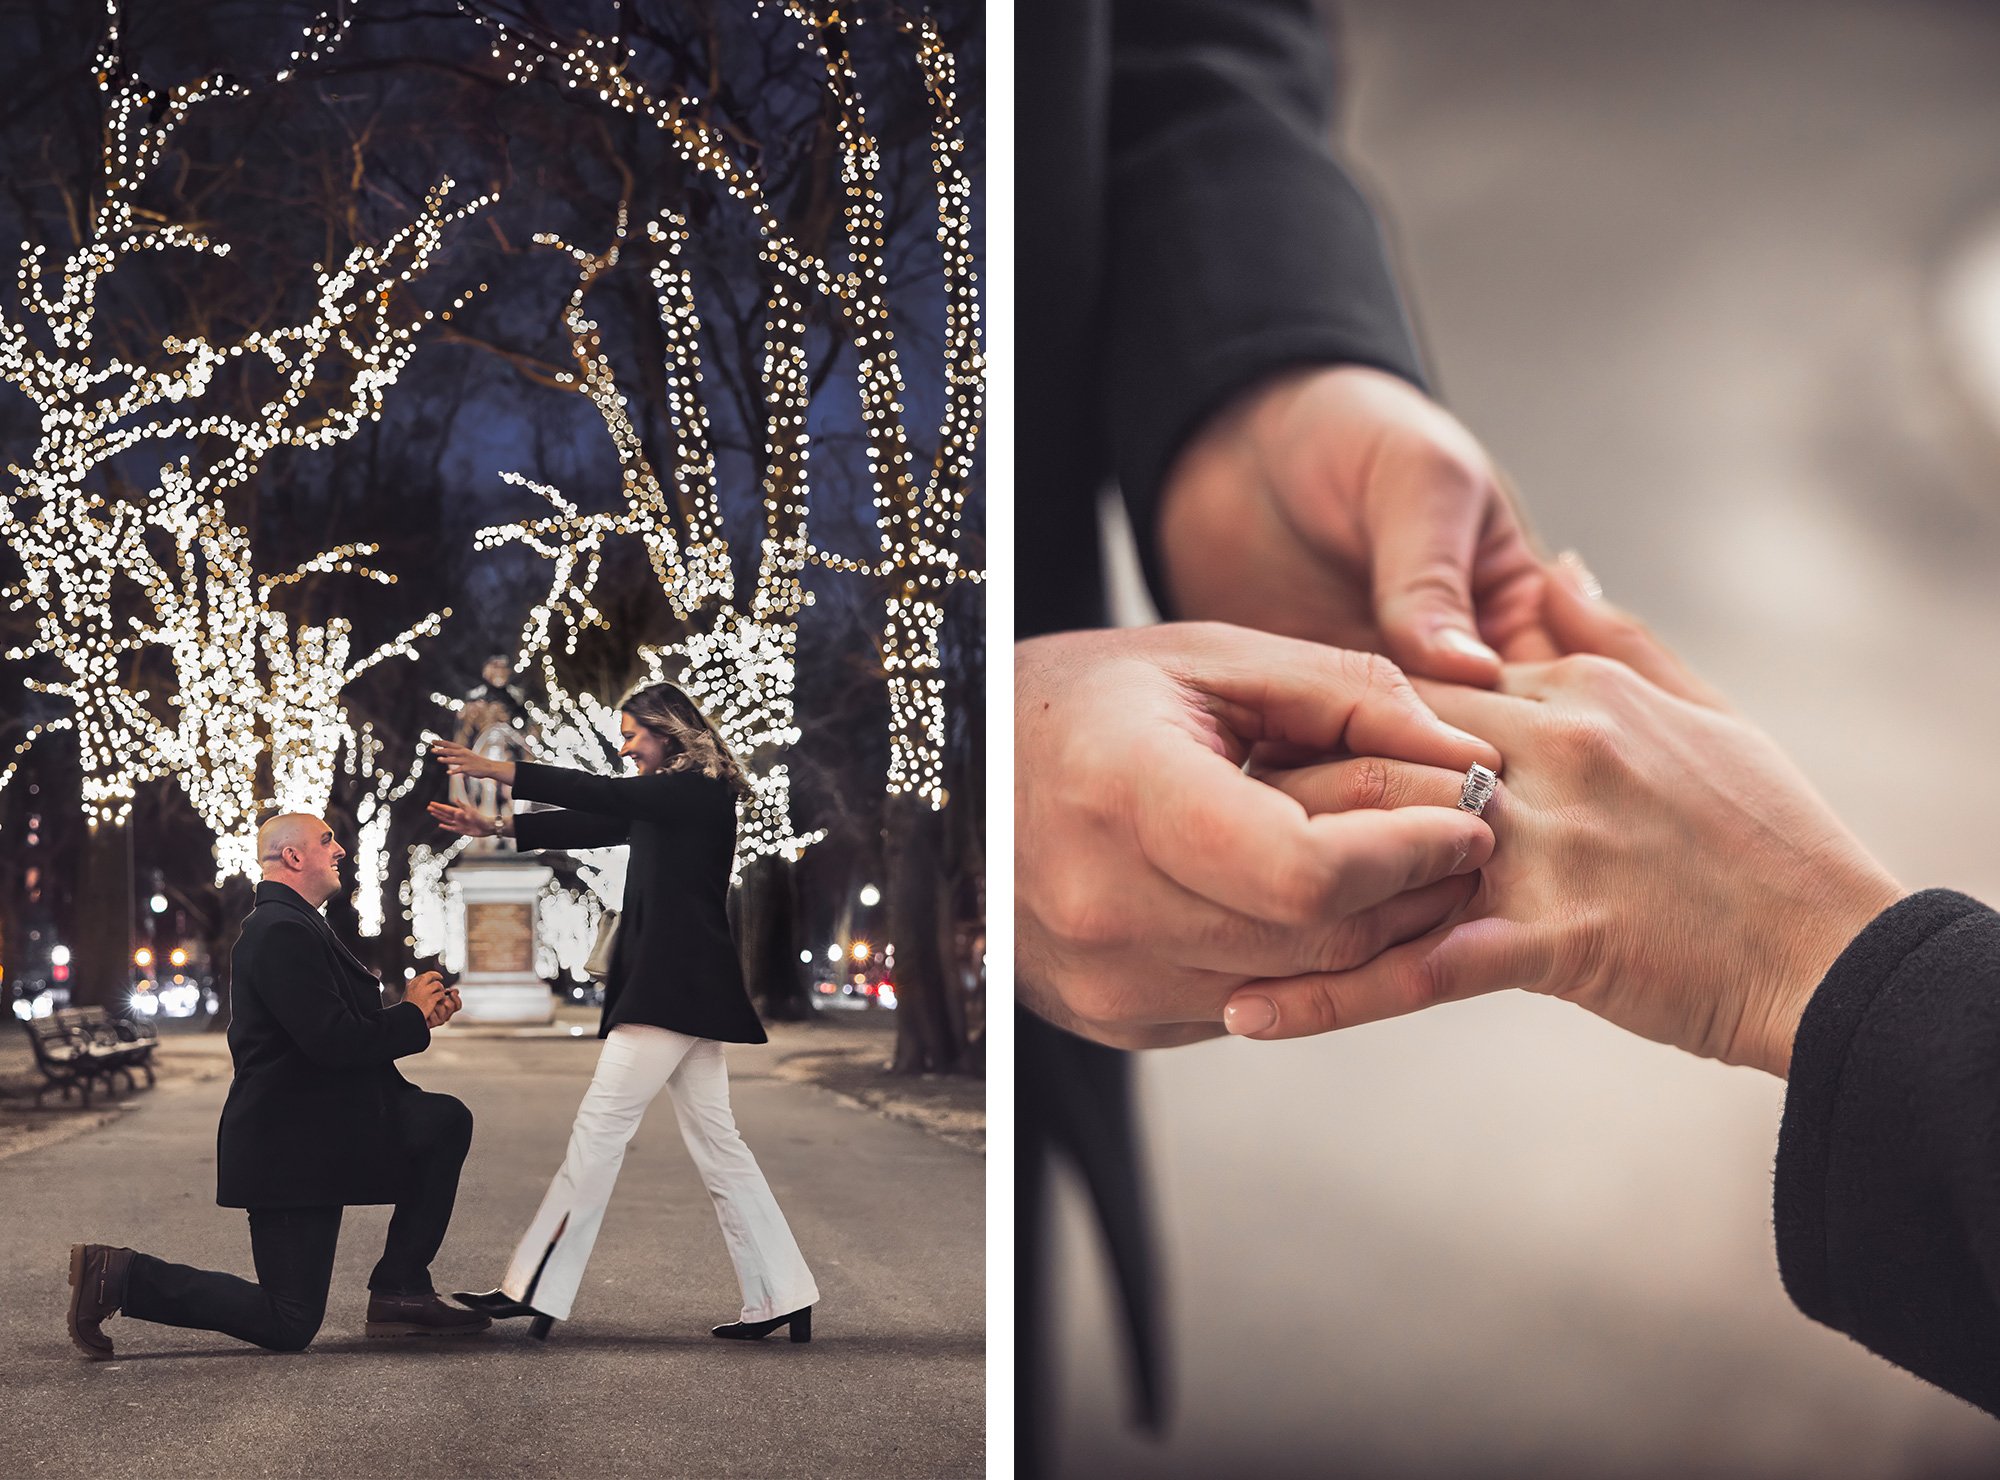 Boston Commonwealth Ave Engagement Proposal  | Stephen Grant Photography